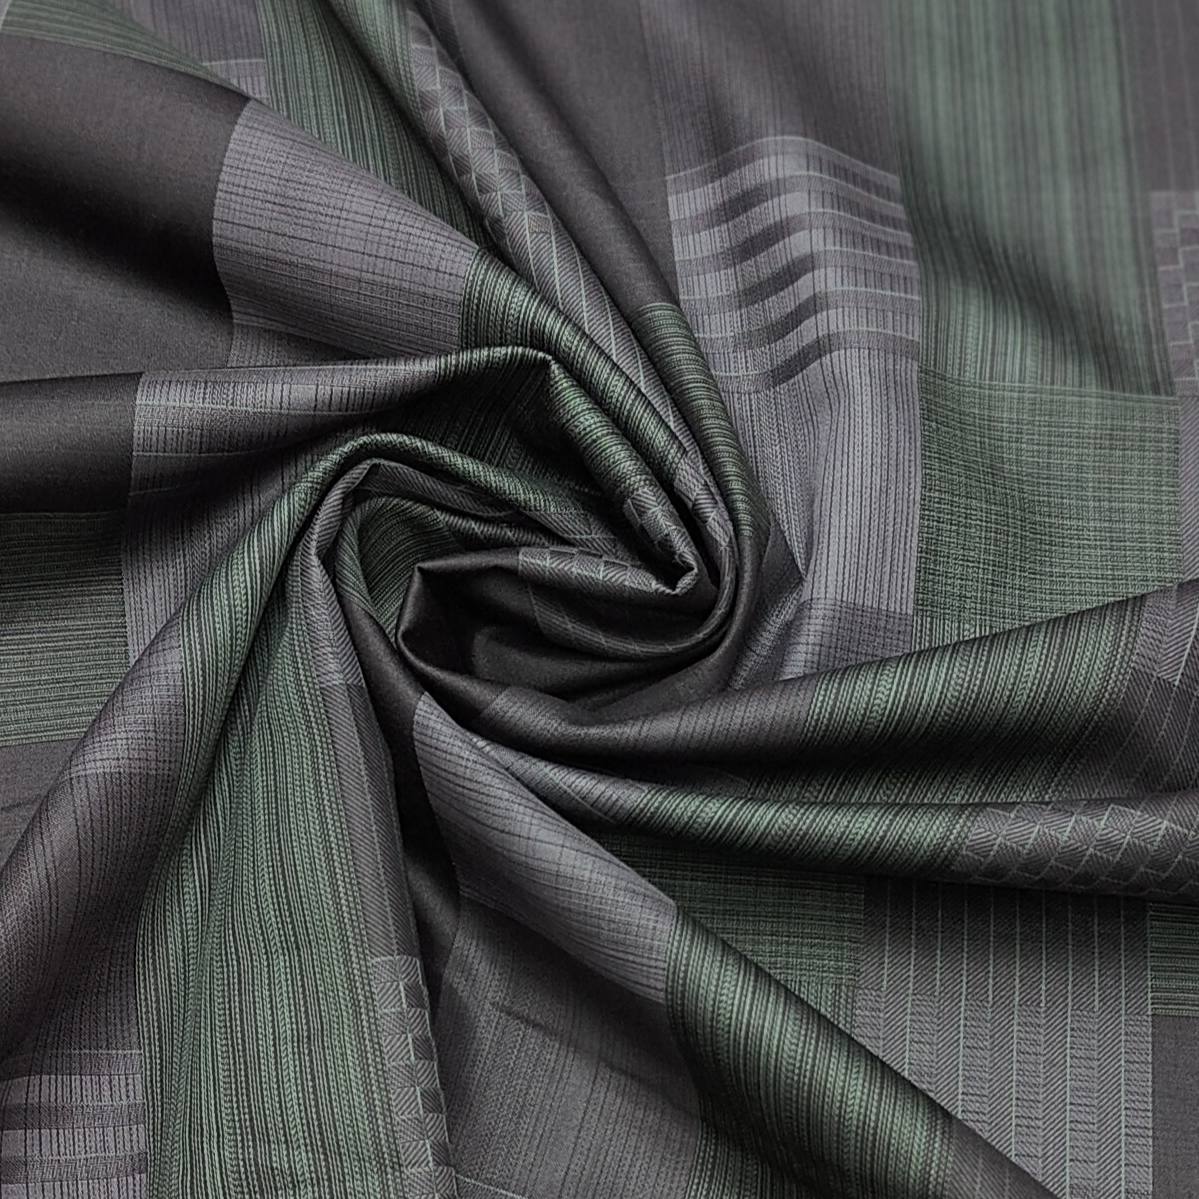 Jacquard Fabric Guide: Fabric Overview of Silk Jacquard and Cotton Jacquard